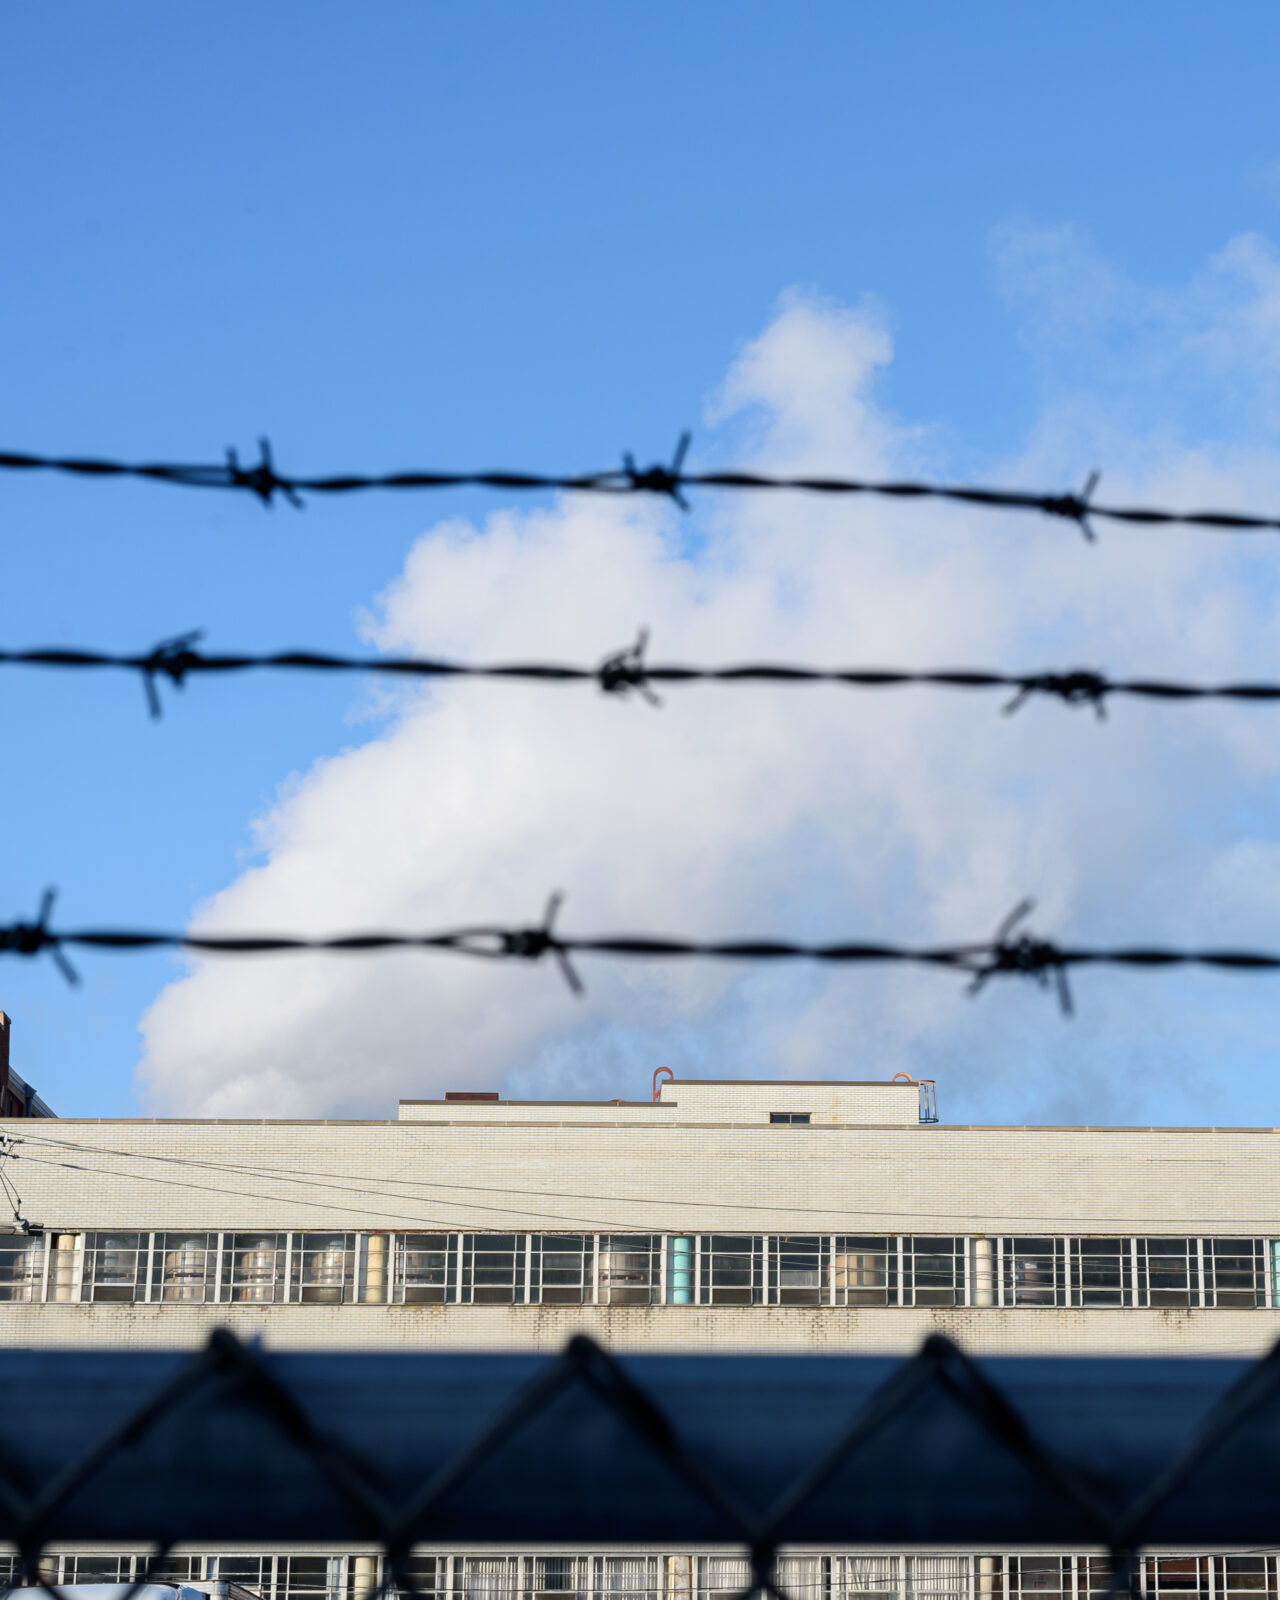 blue sky with fluffy cloud over a building roof behind chain link fence